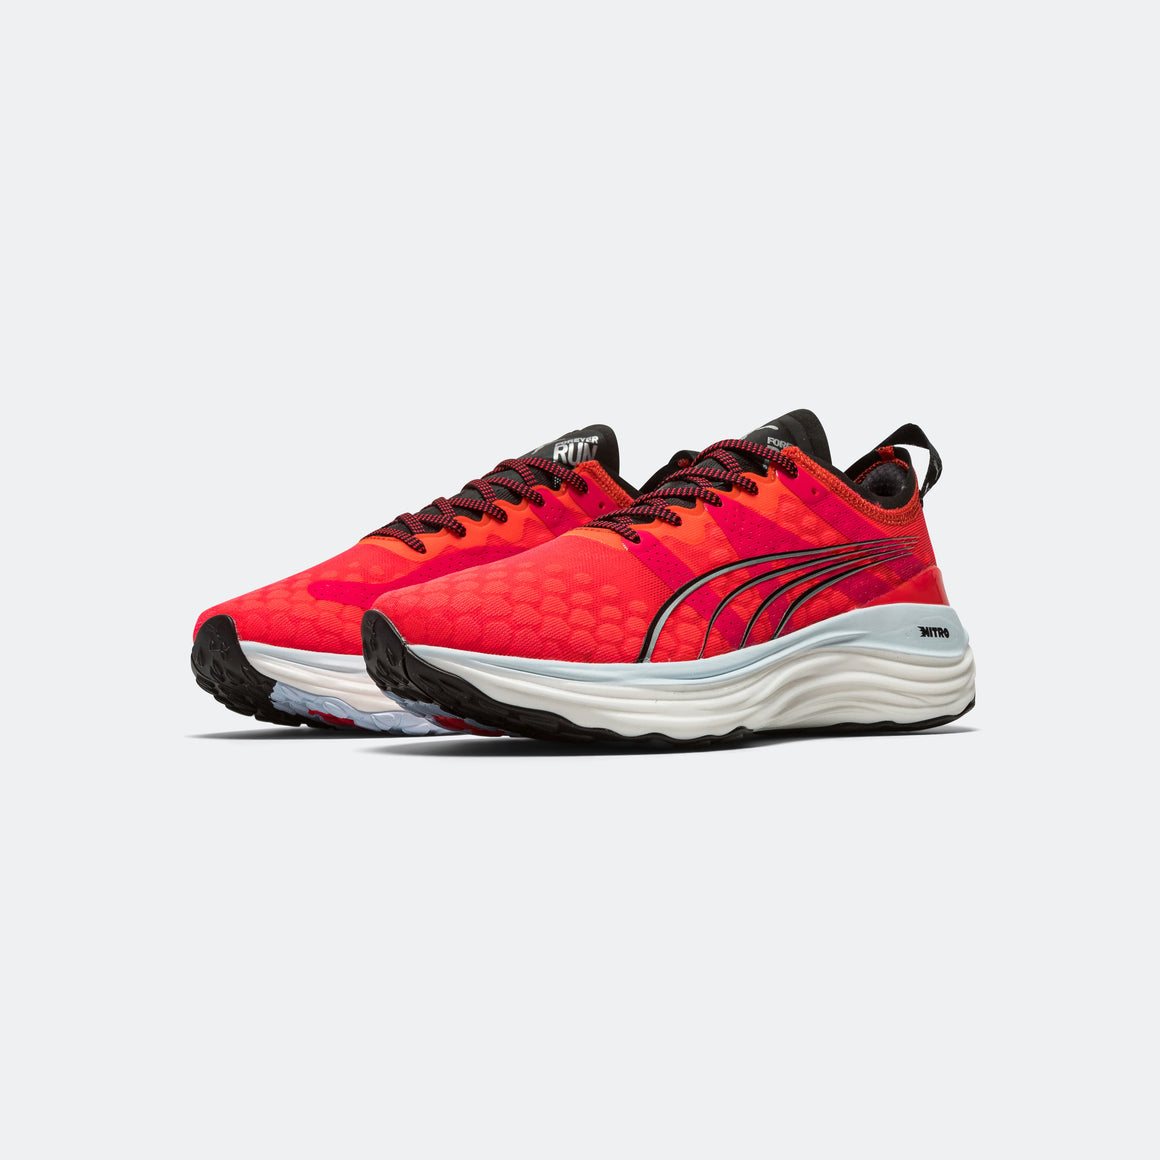 Puma - Womens ForeverRUN Nitro - Fire Orchid - Up There Athletics